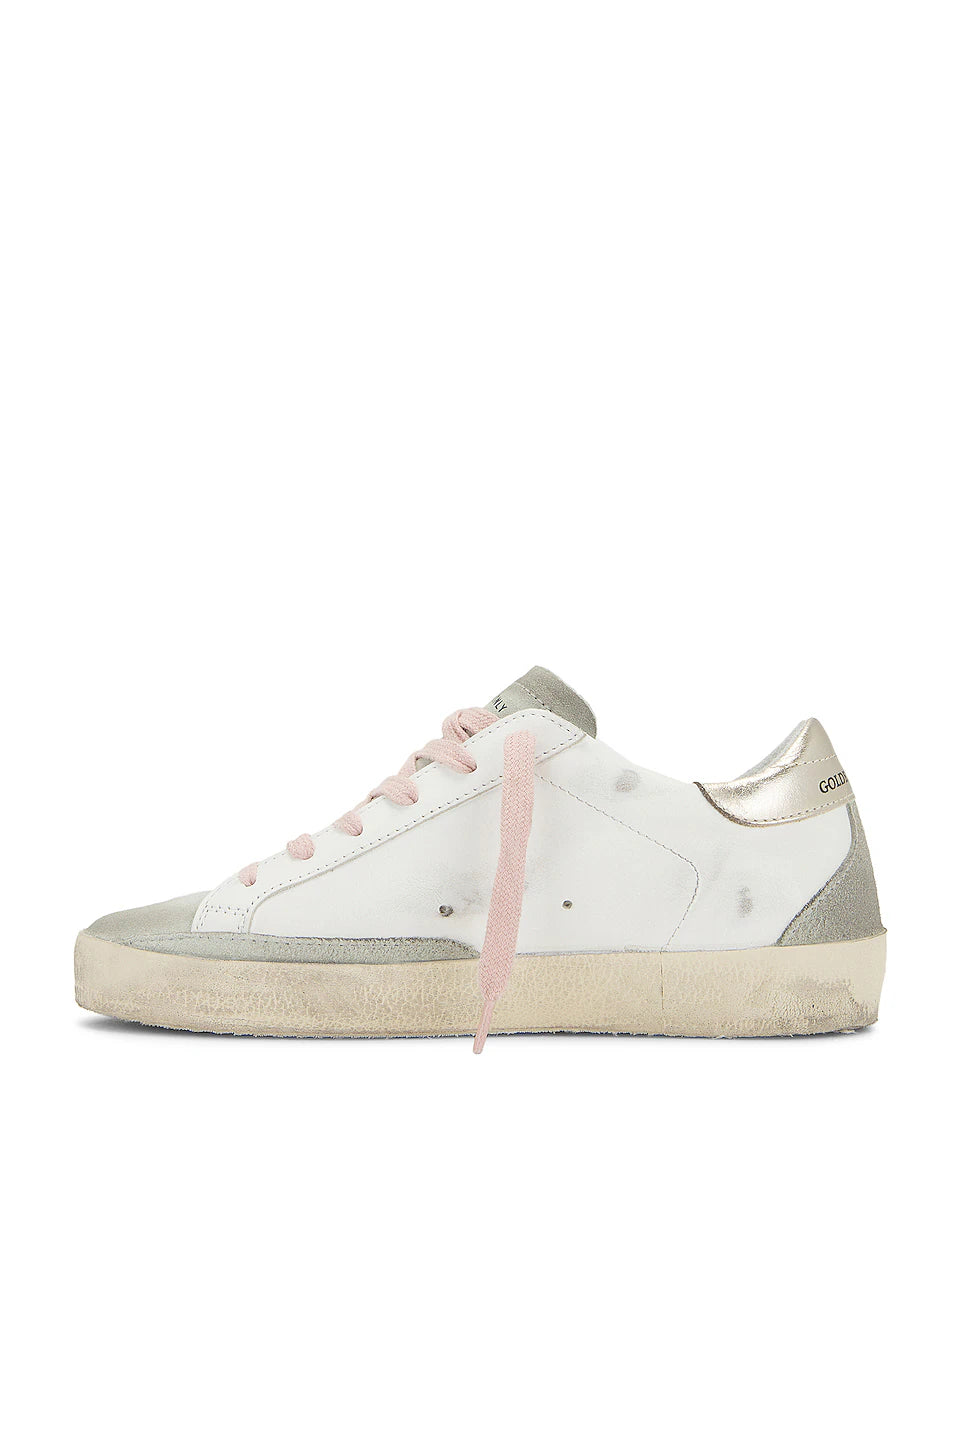 Golden Goose Super-Star Leather Upper and Star Suede Toe and Spur Laminated Heel and Metal Lettering